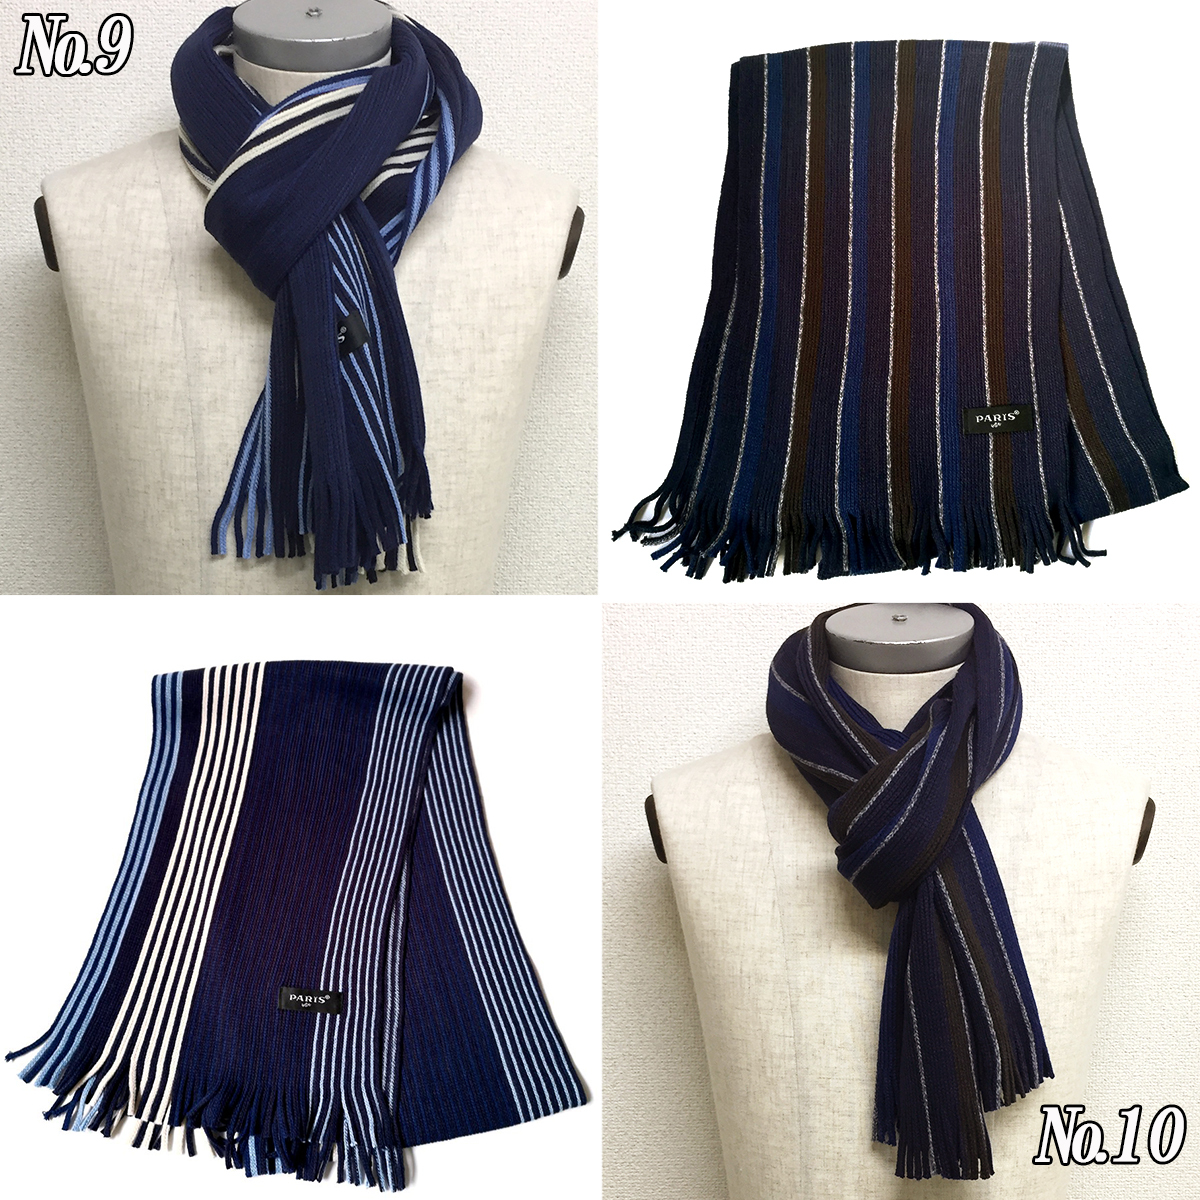  muffler men's lady's stripe student business casual winter protection against cold mail service free shipping 